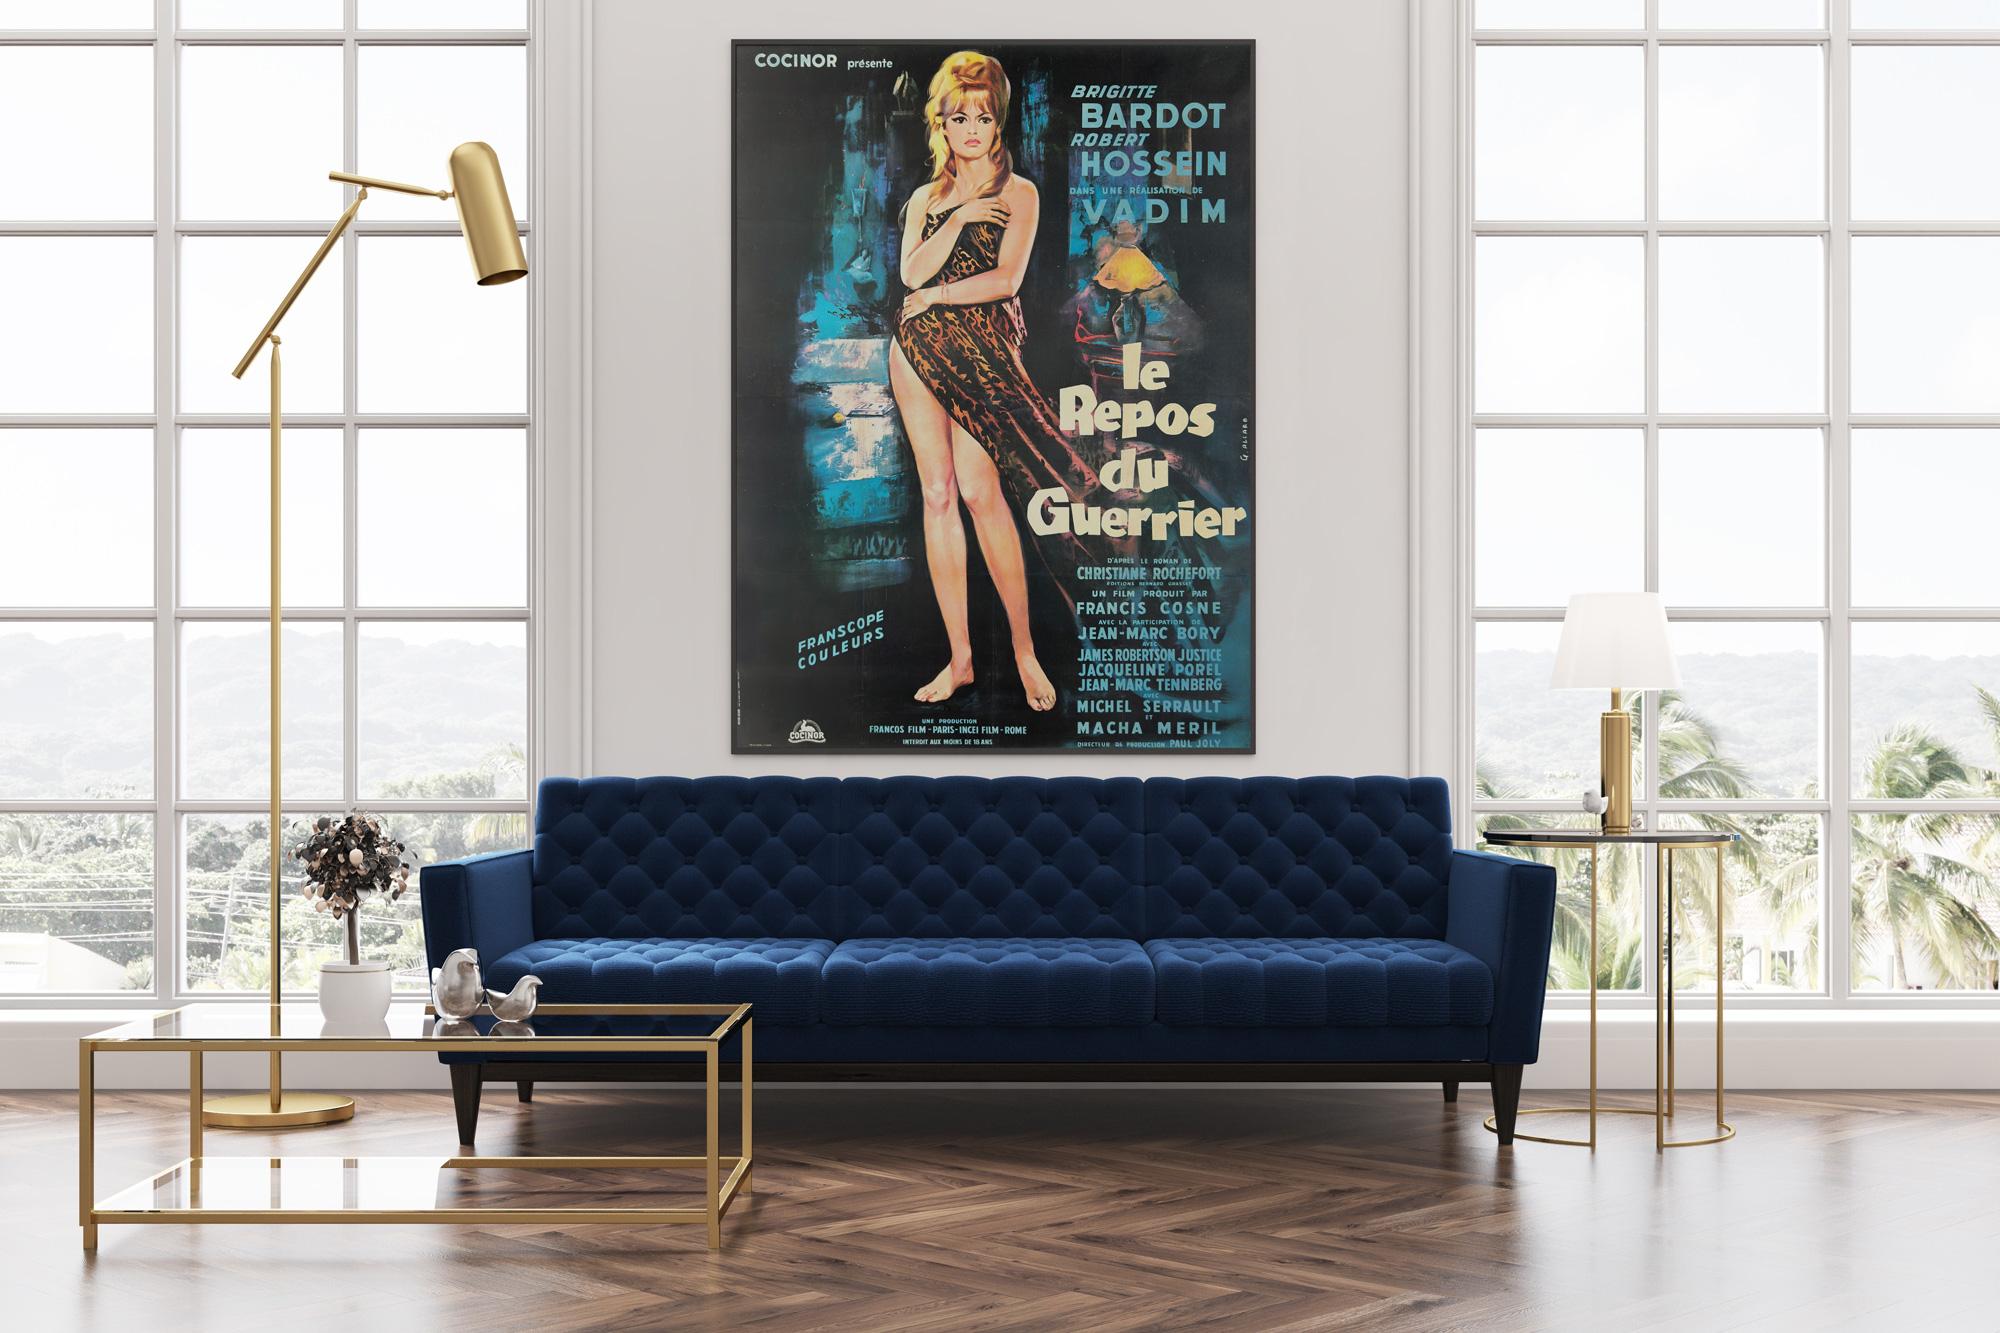 Le Repos du Guerrier (Love on a Pillow), the 1962 French film starring Brigitte Bardot and directed by Roger Vadim. An innocent young woman becomes involved with an alcoholic who tries to destroy her life along with his own.

A beautiful design by